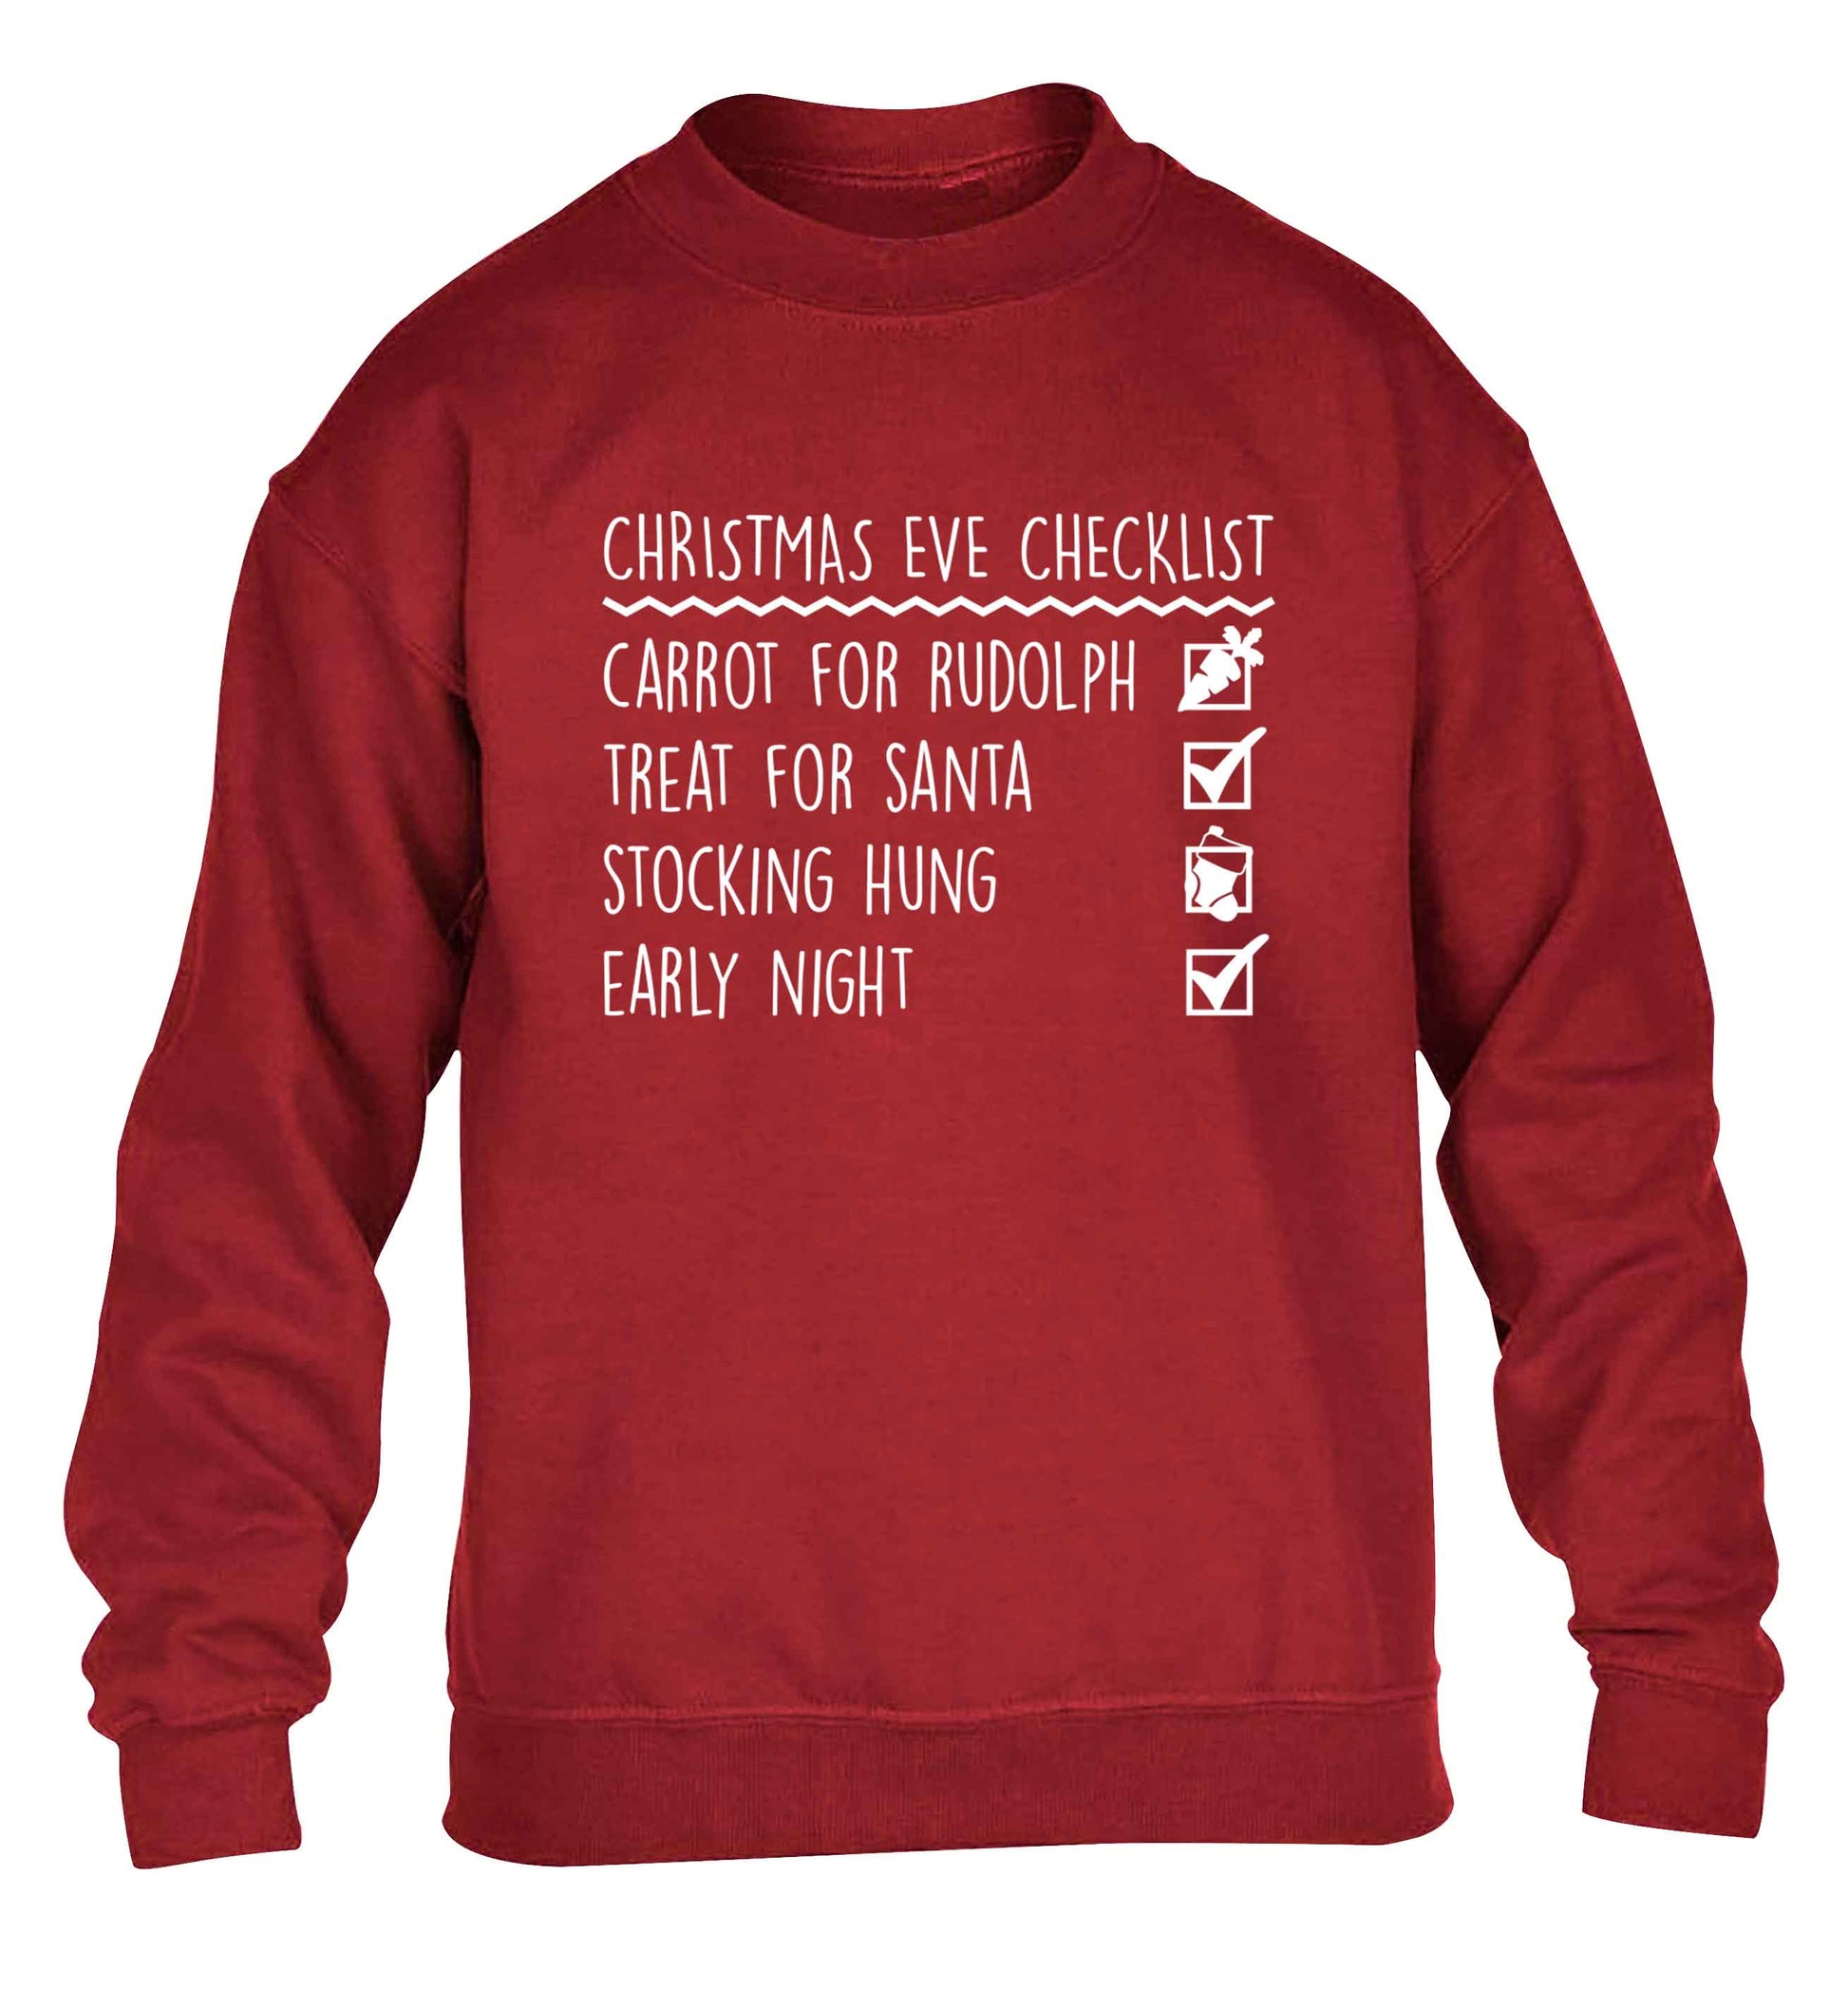 Candy Canes Candy Corns children's grey sweater 12-13 Years